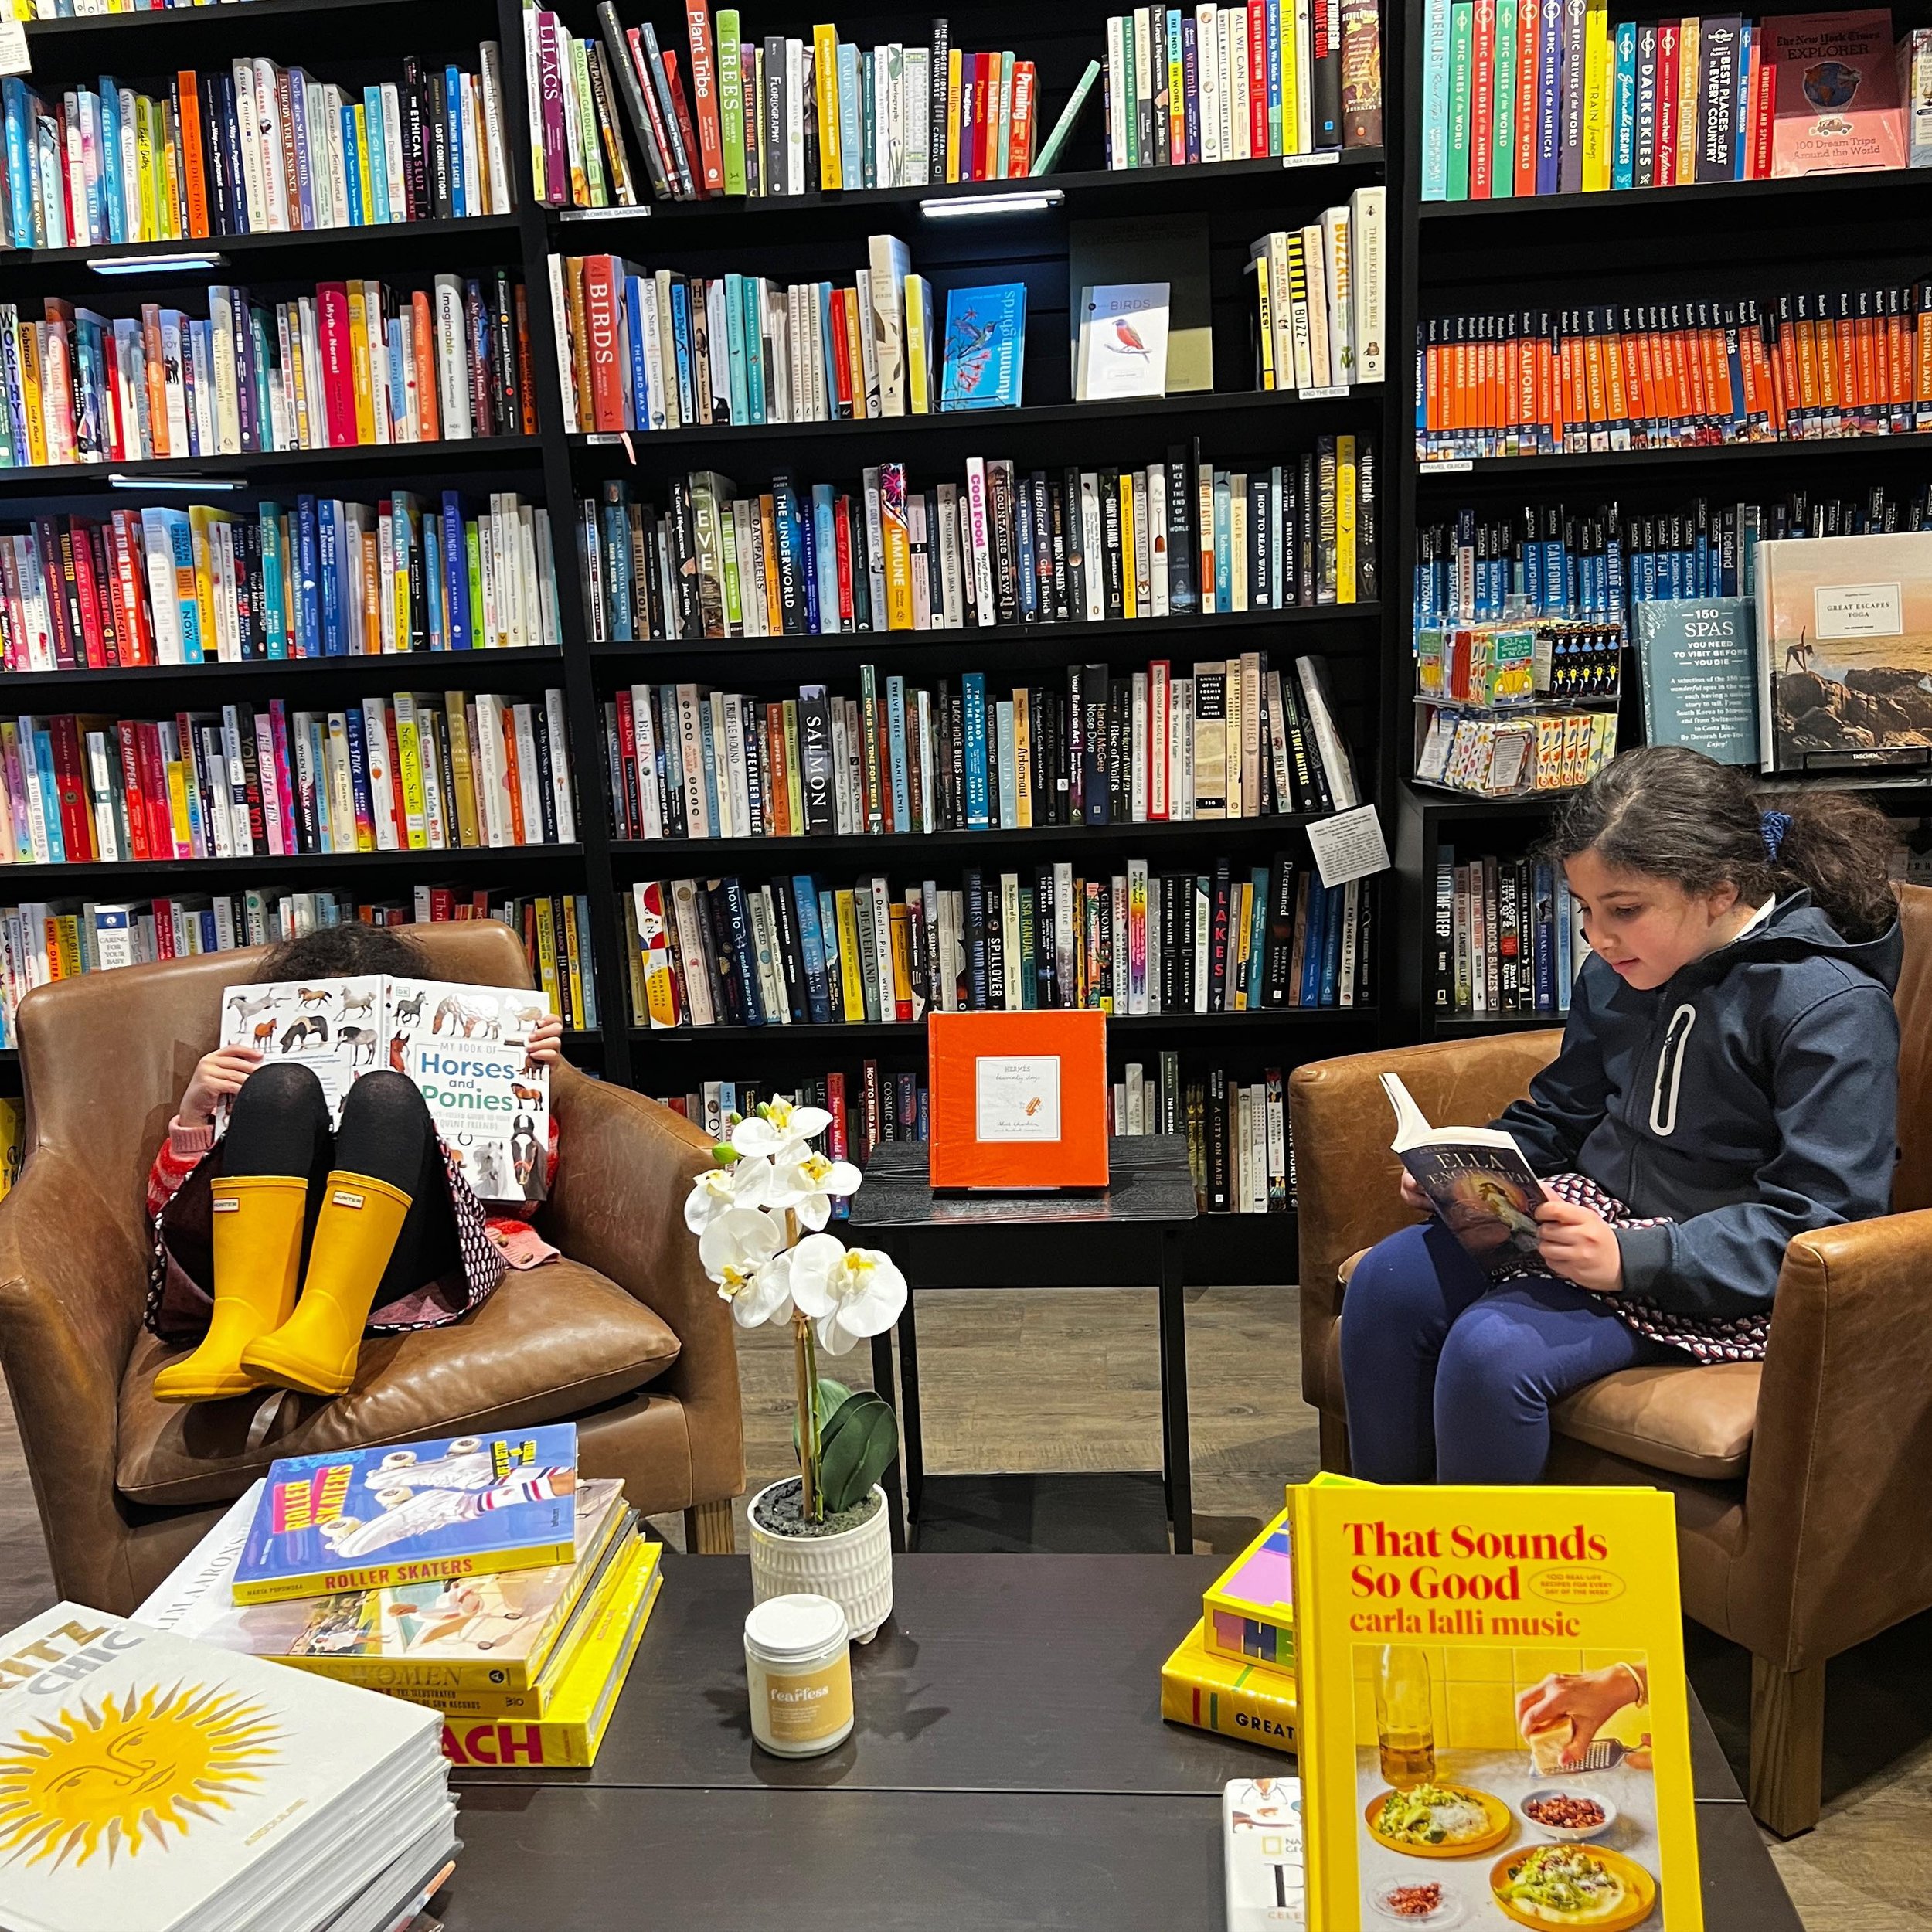 Our favourite thing in the world is seeing young readers engrossed in their books! Whether it&rsquo;s Horses And Ponies or Ella Enchanted, all reading is good reading! 

#indiebookstore #bostonma #brooklinema #chestnuthillma #newtonma #bostonkids